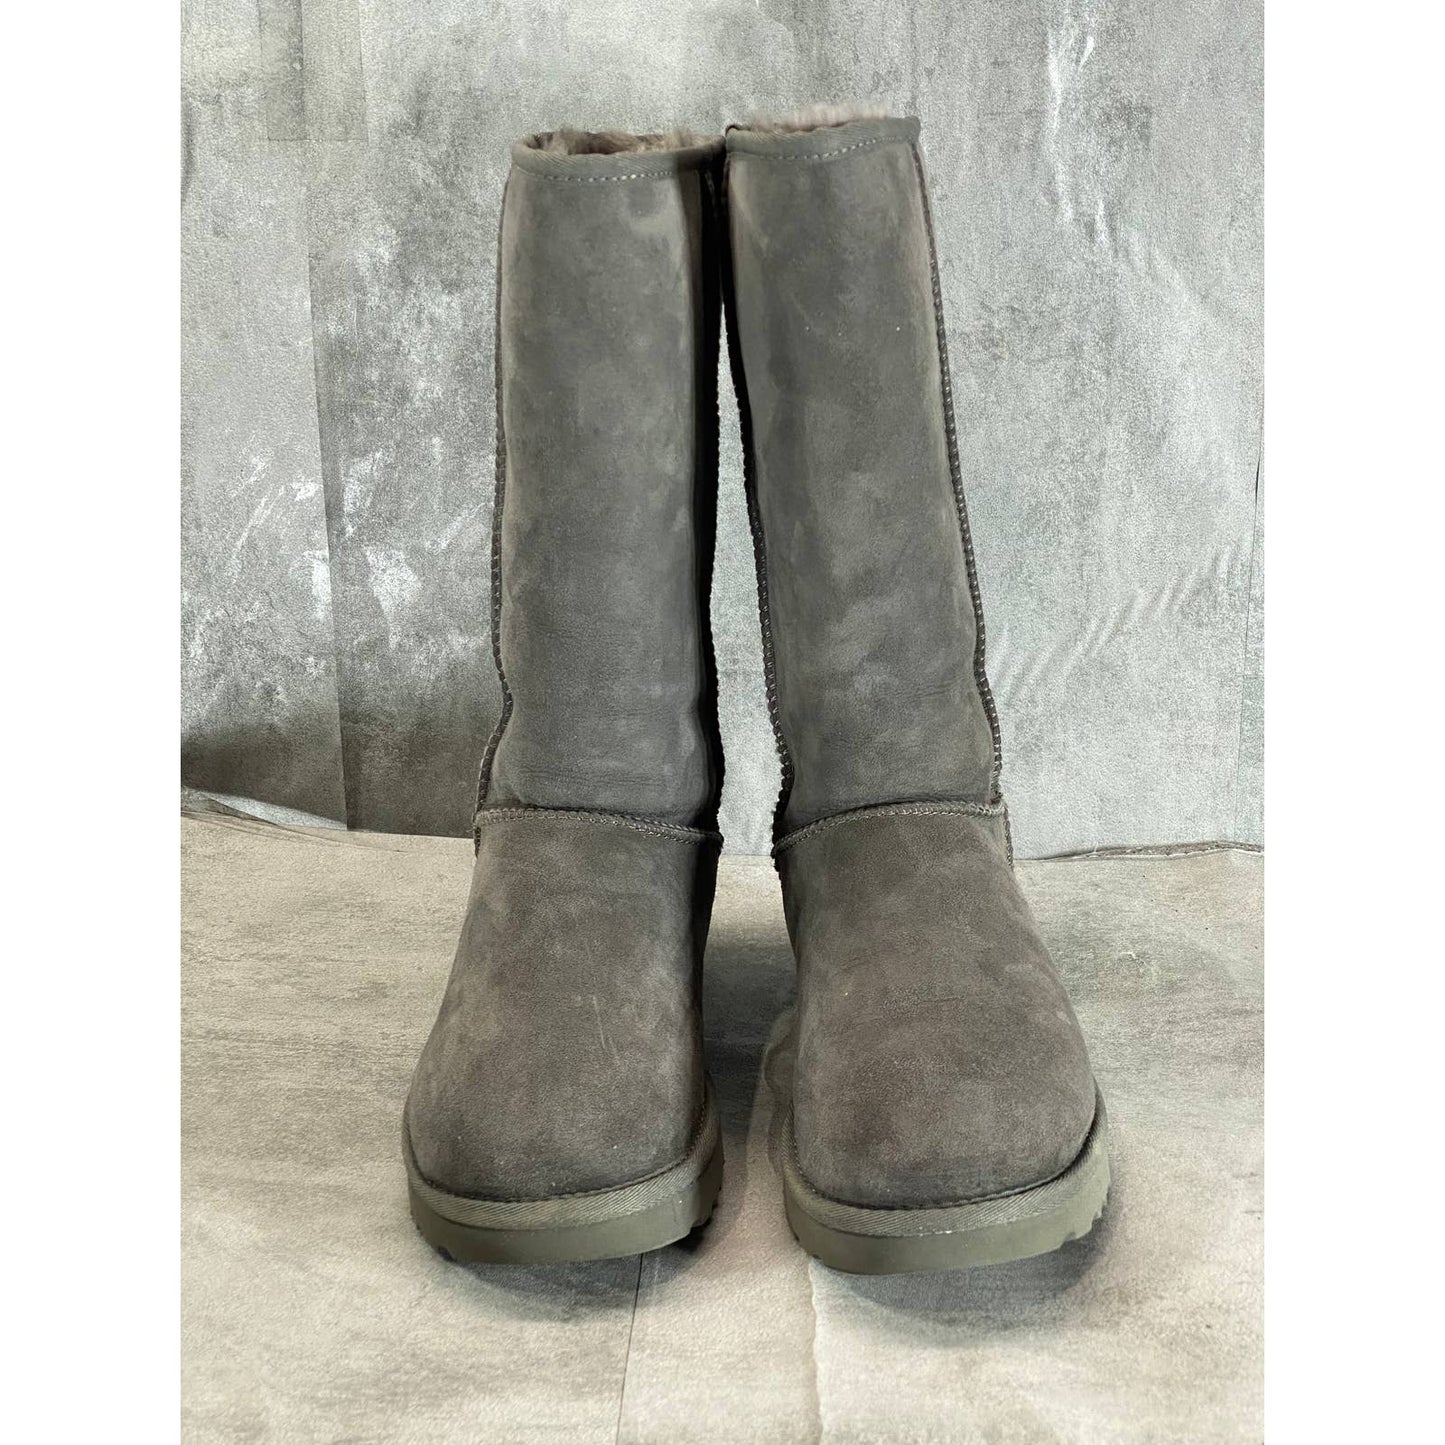 UGG Women's Grey Suede Classic II Tall Round-Toe Pull-On Boots SZ 8